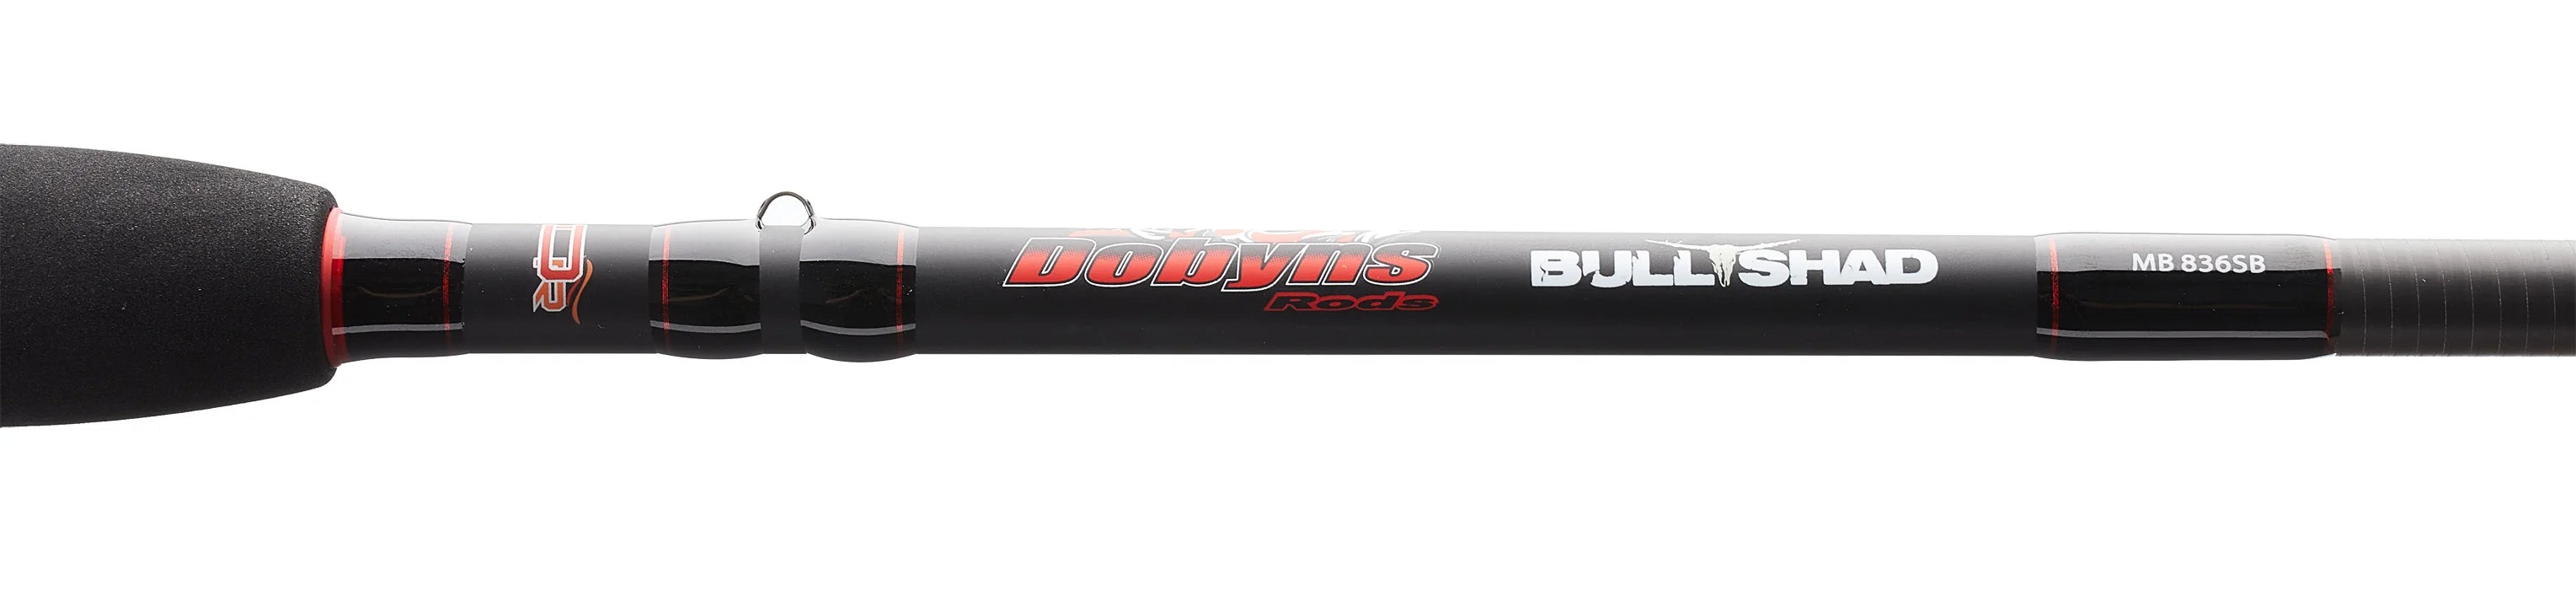 DOBYNS MIKE BUCCA BULL SHAD SERIES RODS